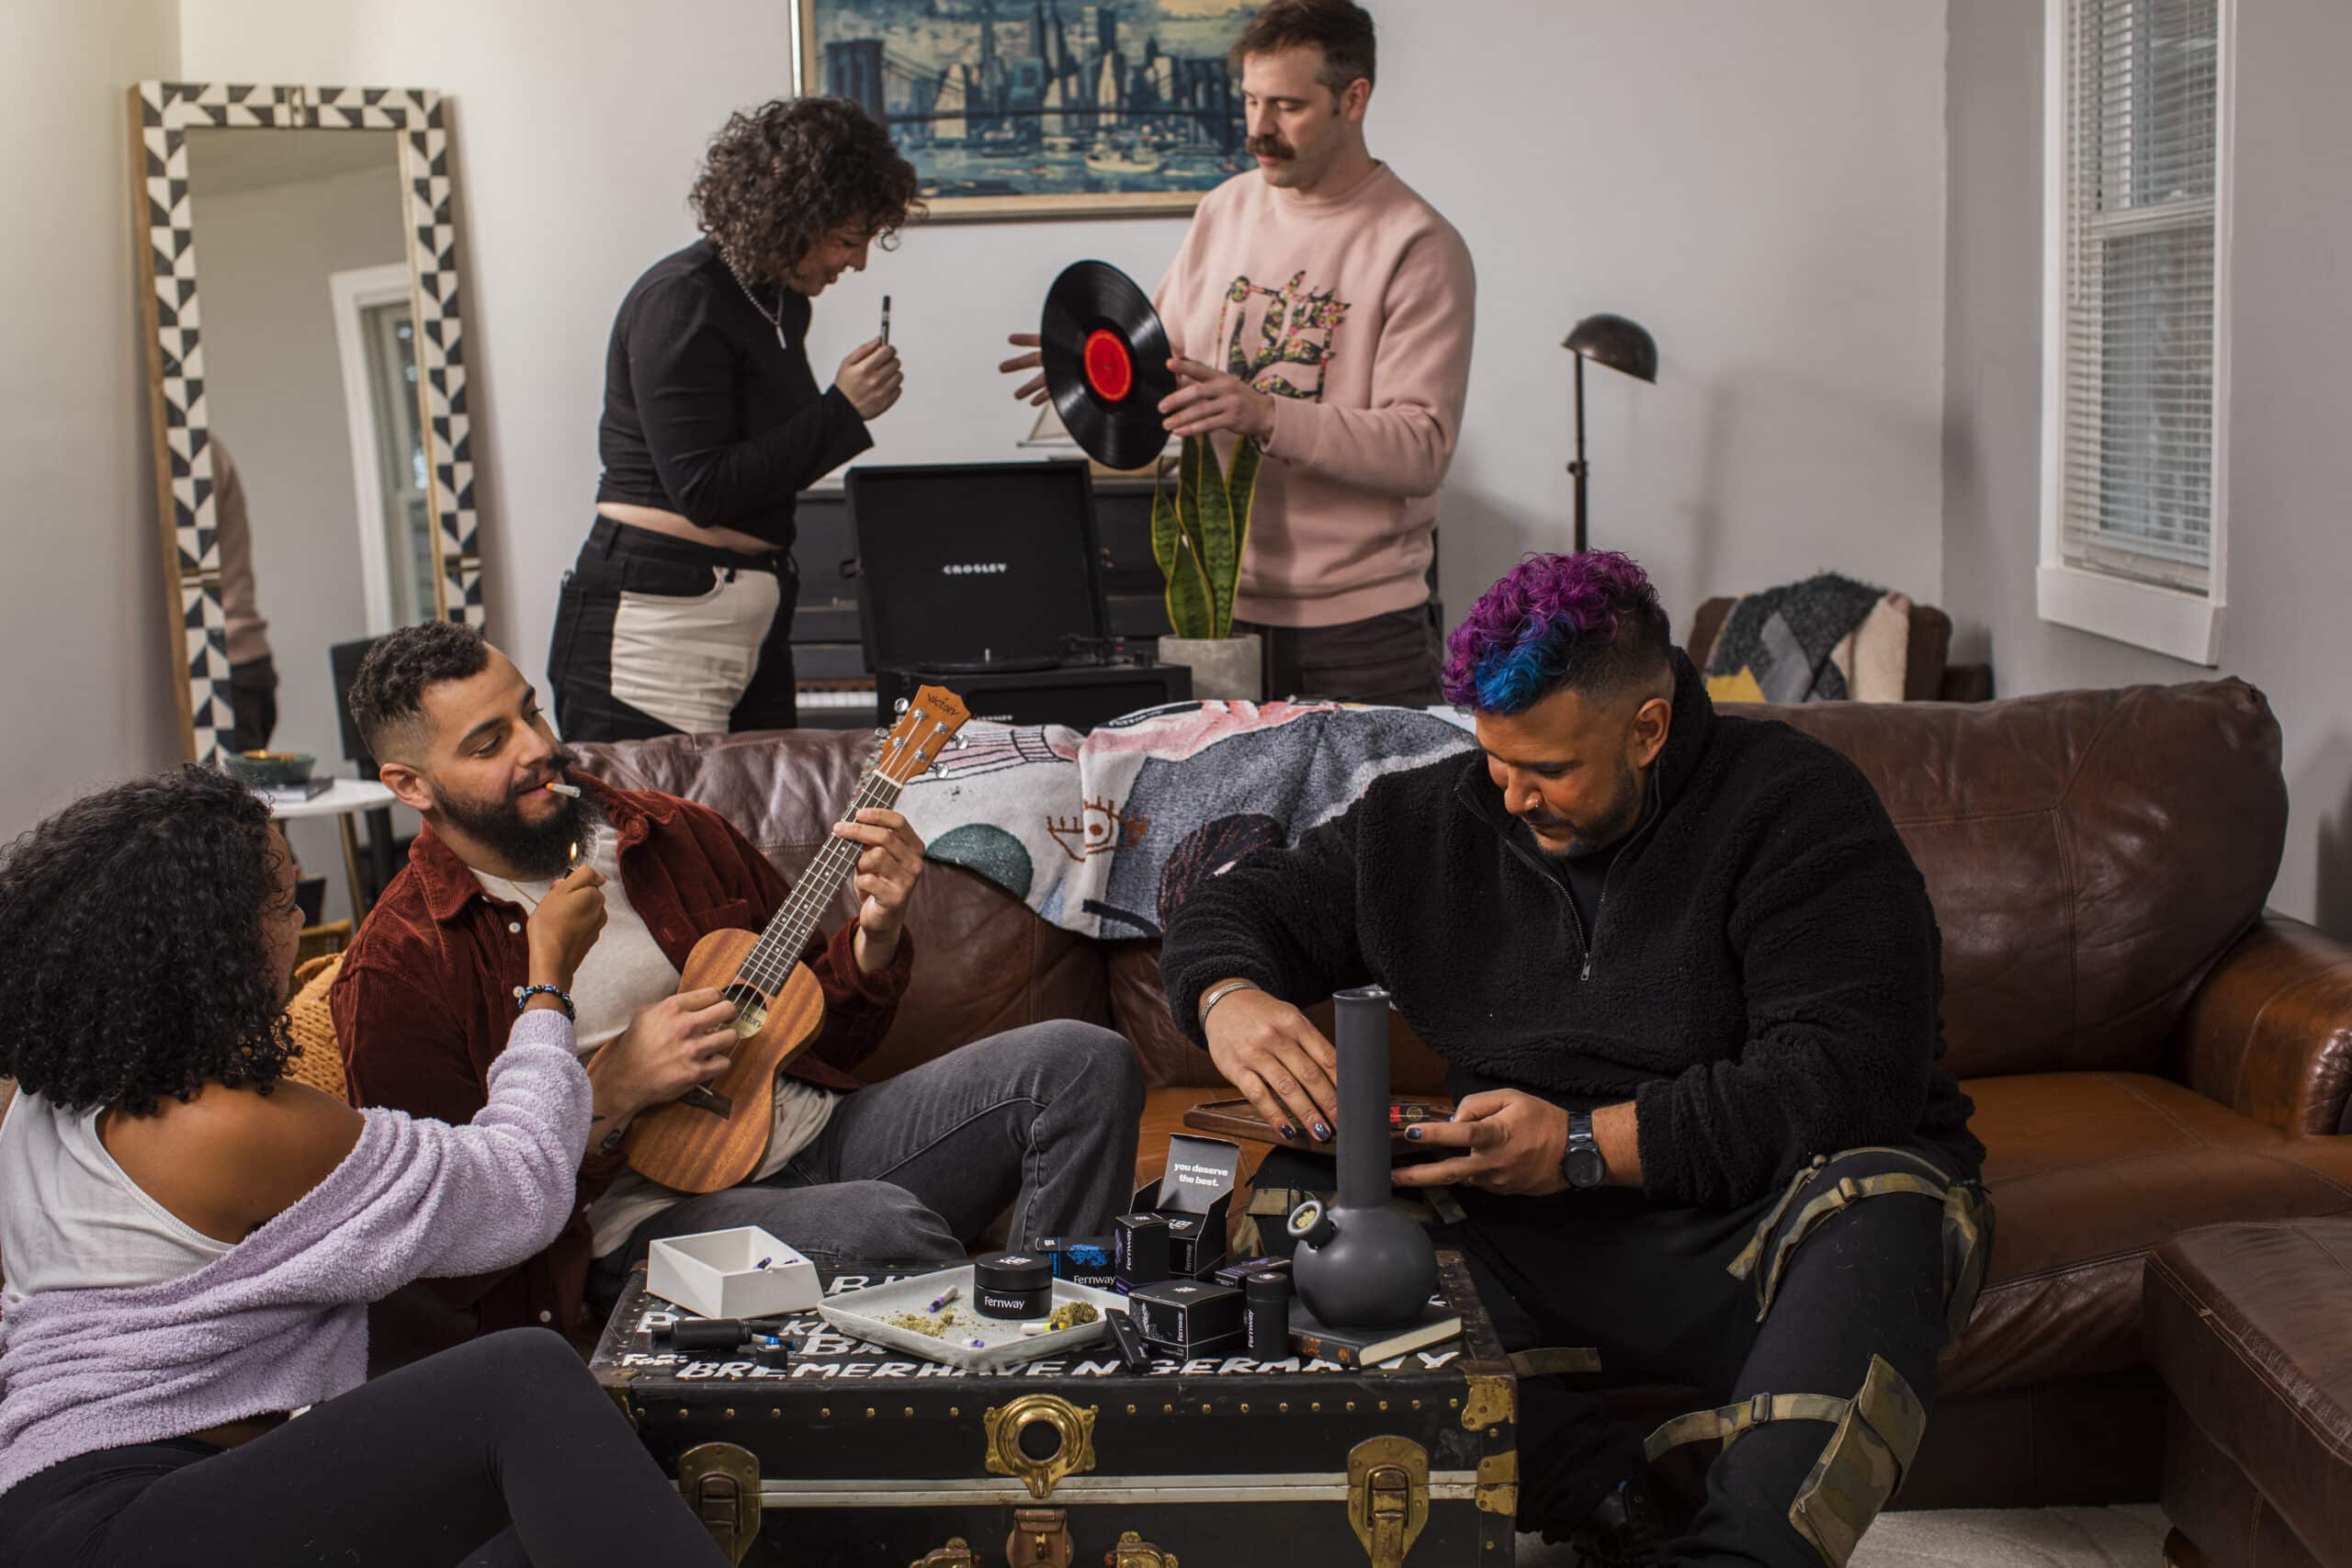 A group of friends - two women and three men - lounge around a living room smoking, playing music, and chilling.